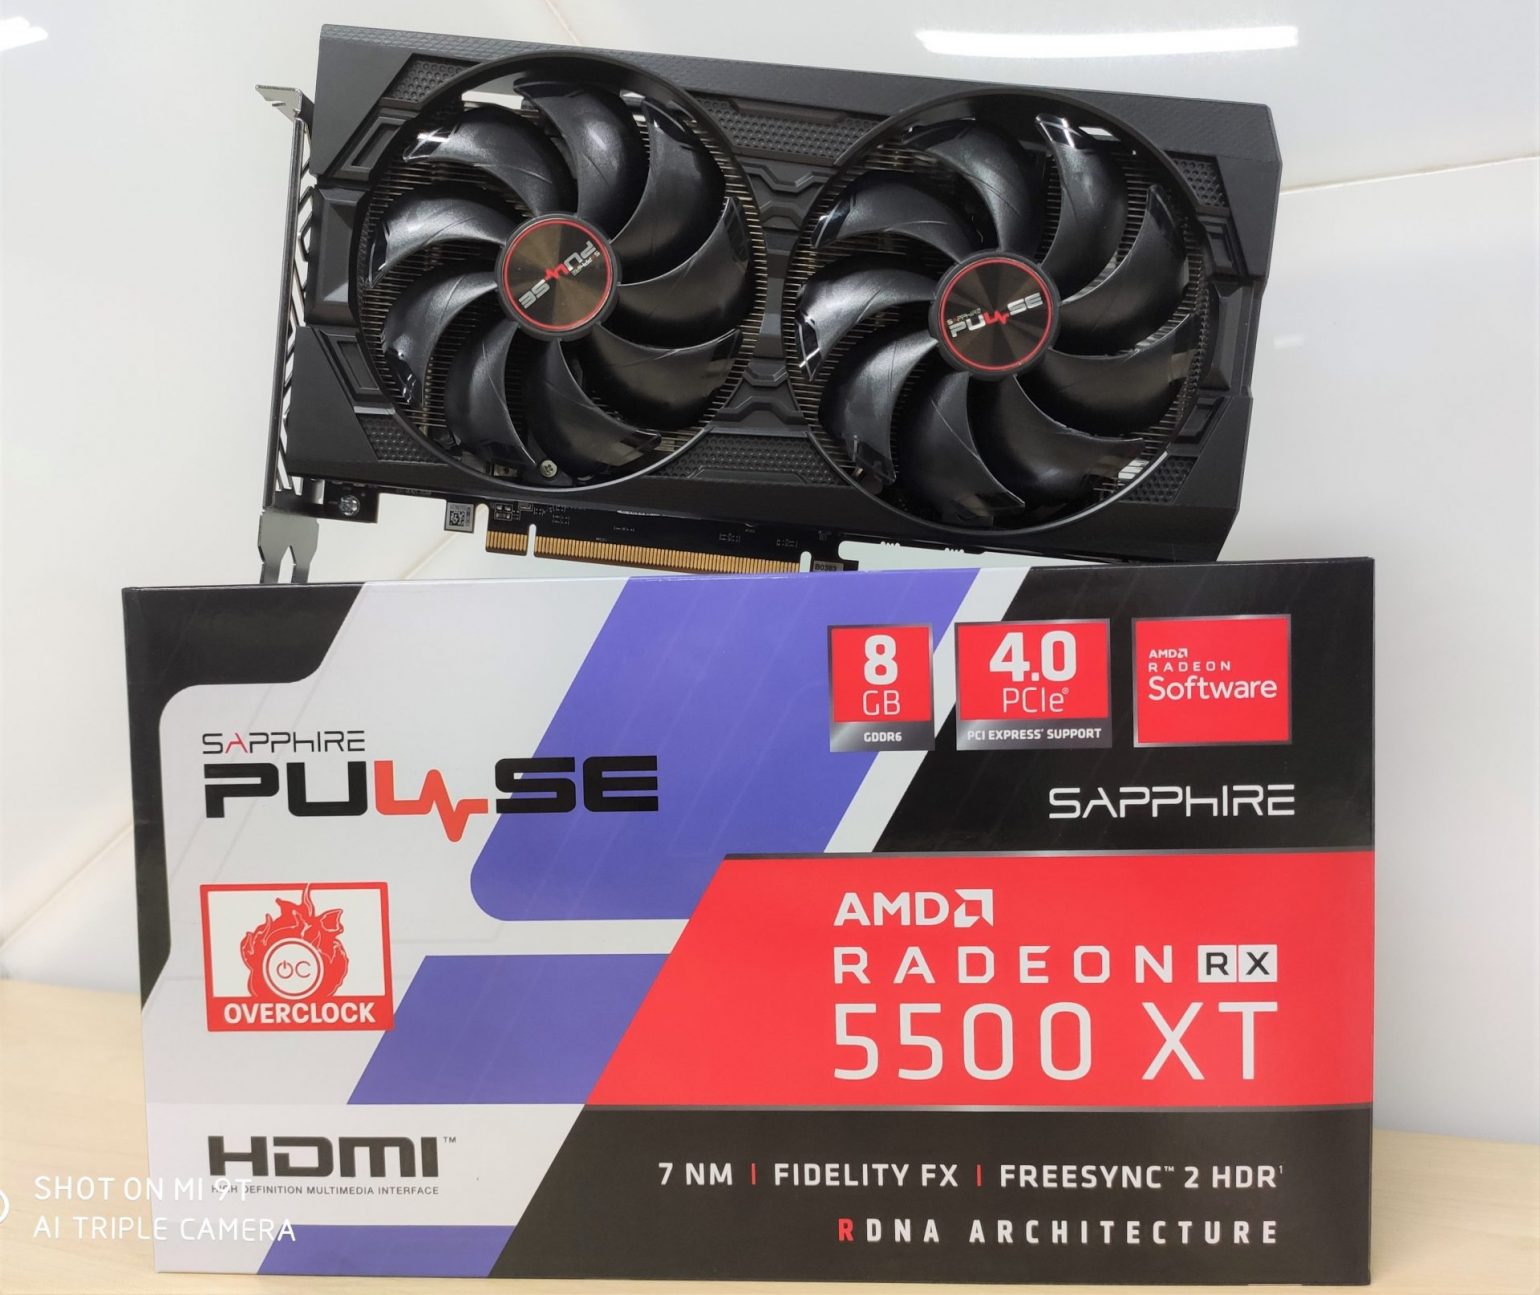 Sapphire Radeon RX 5500 XT 8GB PULSE Review - The new mainstream king ...